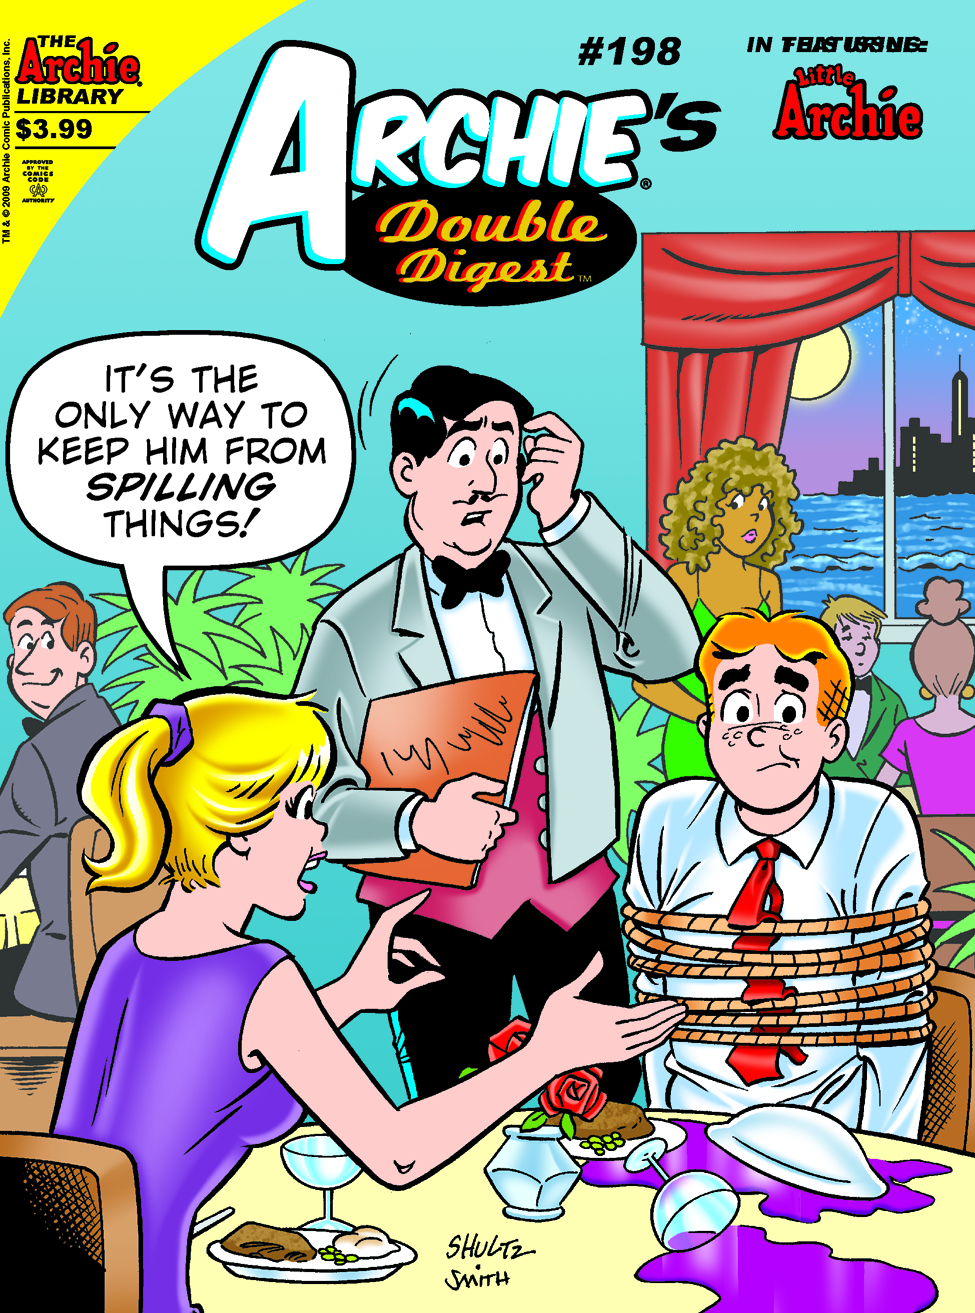 ARCHIE DOUBLE DIGEST #198 (NOTE PRICE)